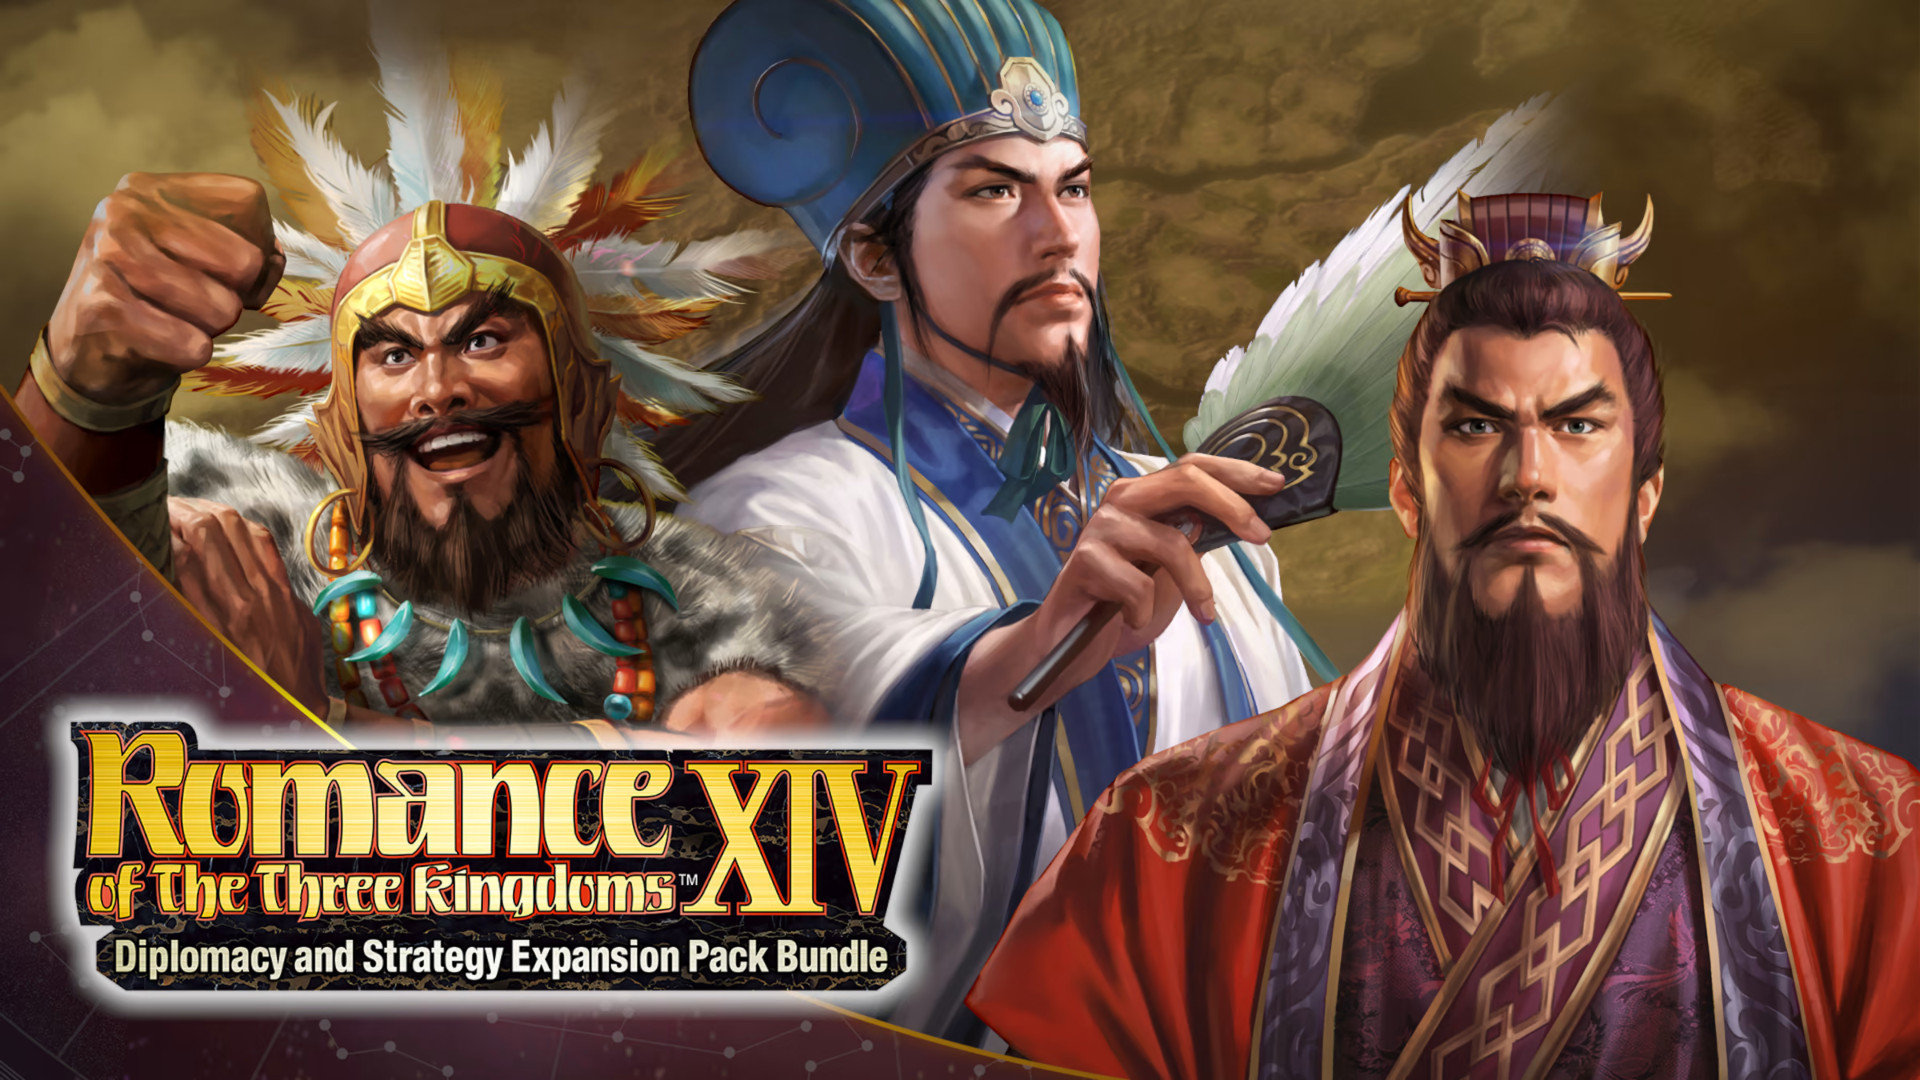 [$ 39.55] Romance of the Three Kingdoms XIV - Diplomacy and Strategy Expansion Pack DLC Steam CD key